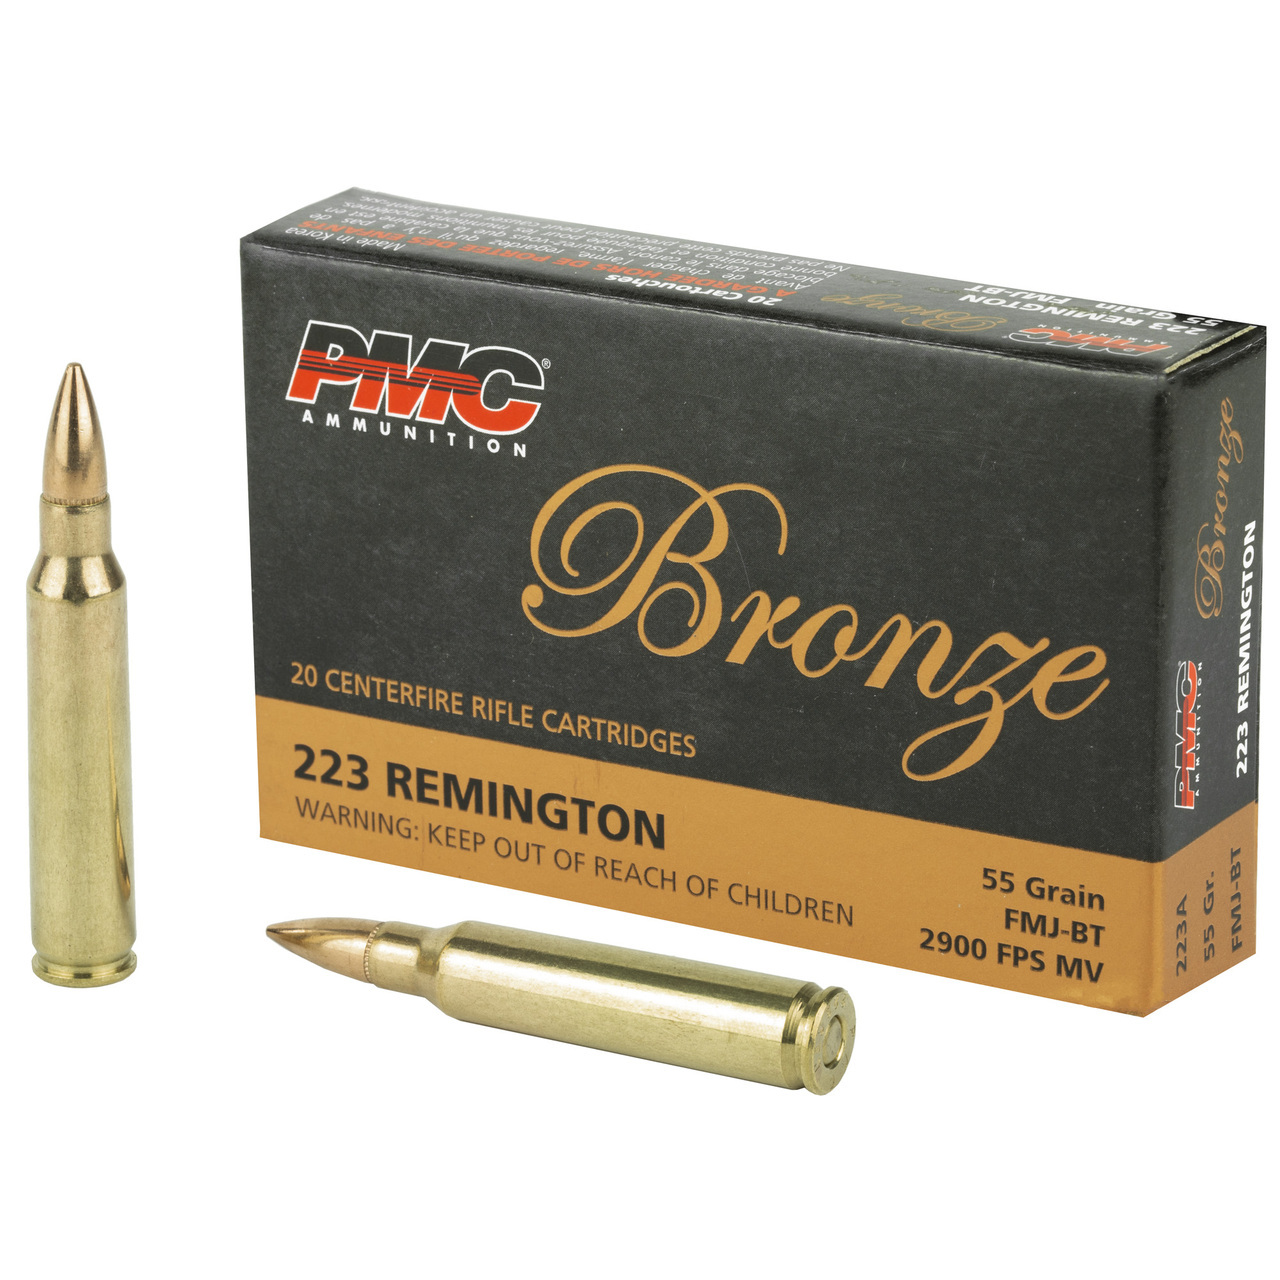 PMC 223 Rem Ammo For Sale in M2A1 - 55gr FMJ - 223A/MB- 840 Rounds